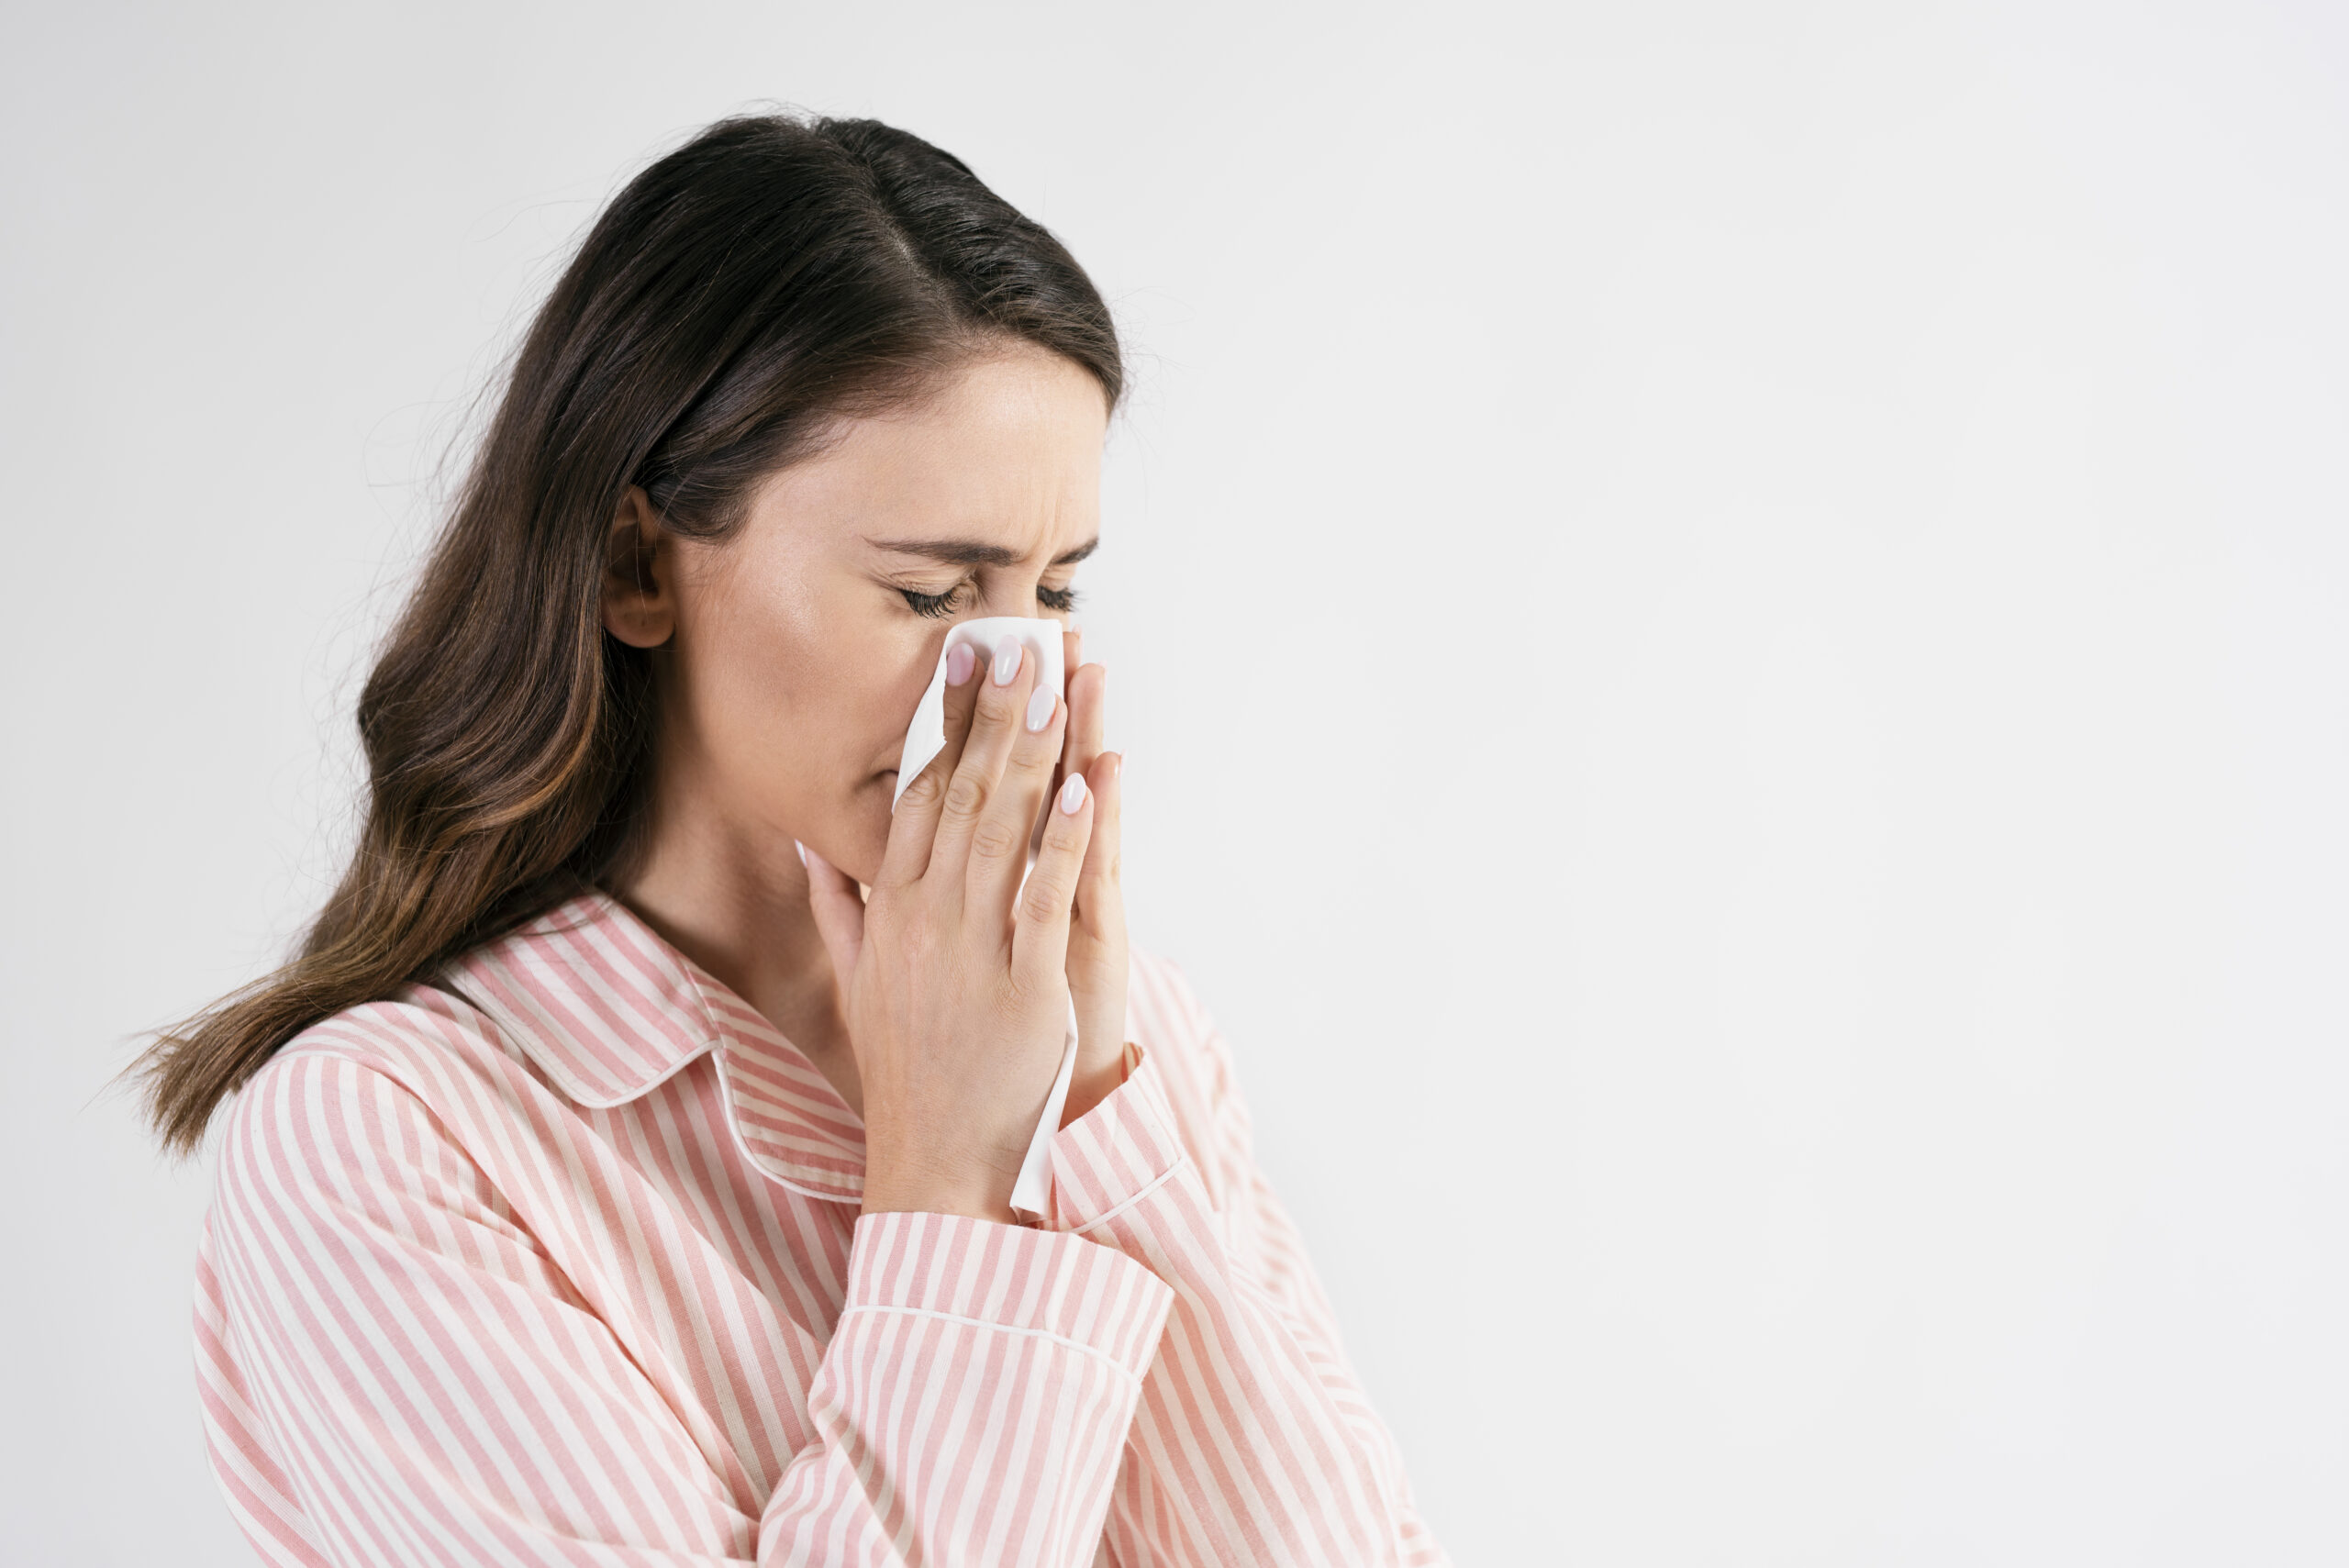 Sinusitis: What Is, Types, Causes, Symptoms, Diagnosis, and Prevention